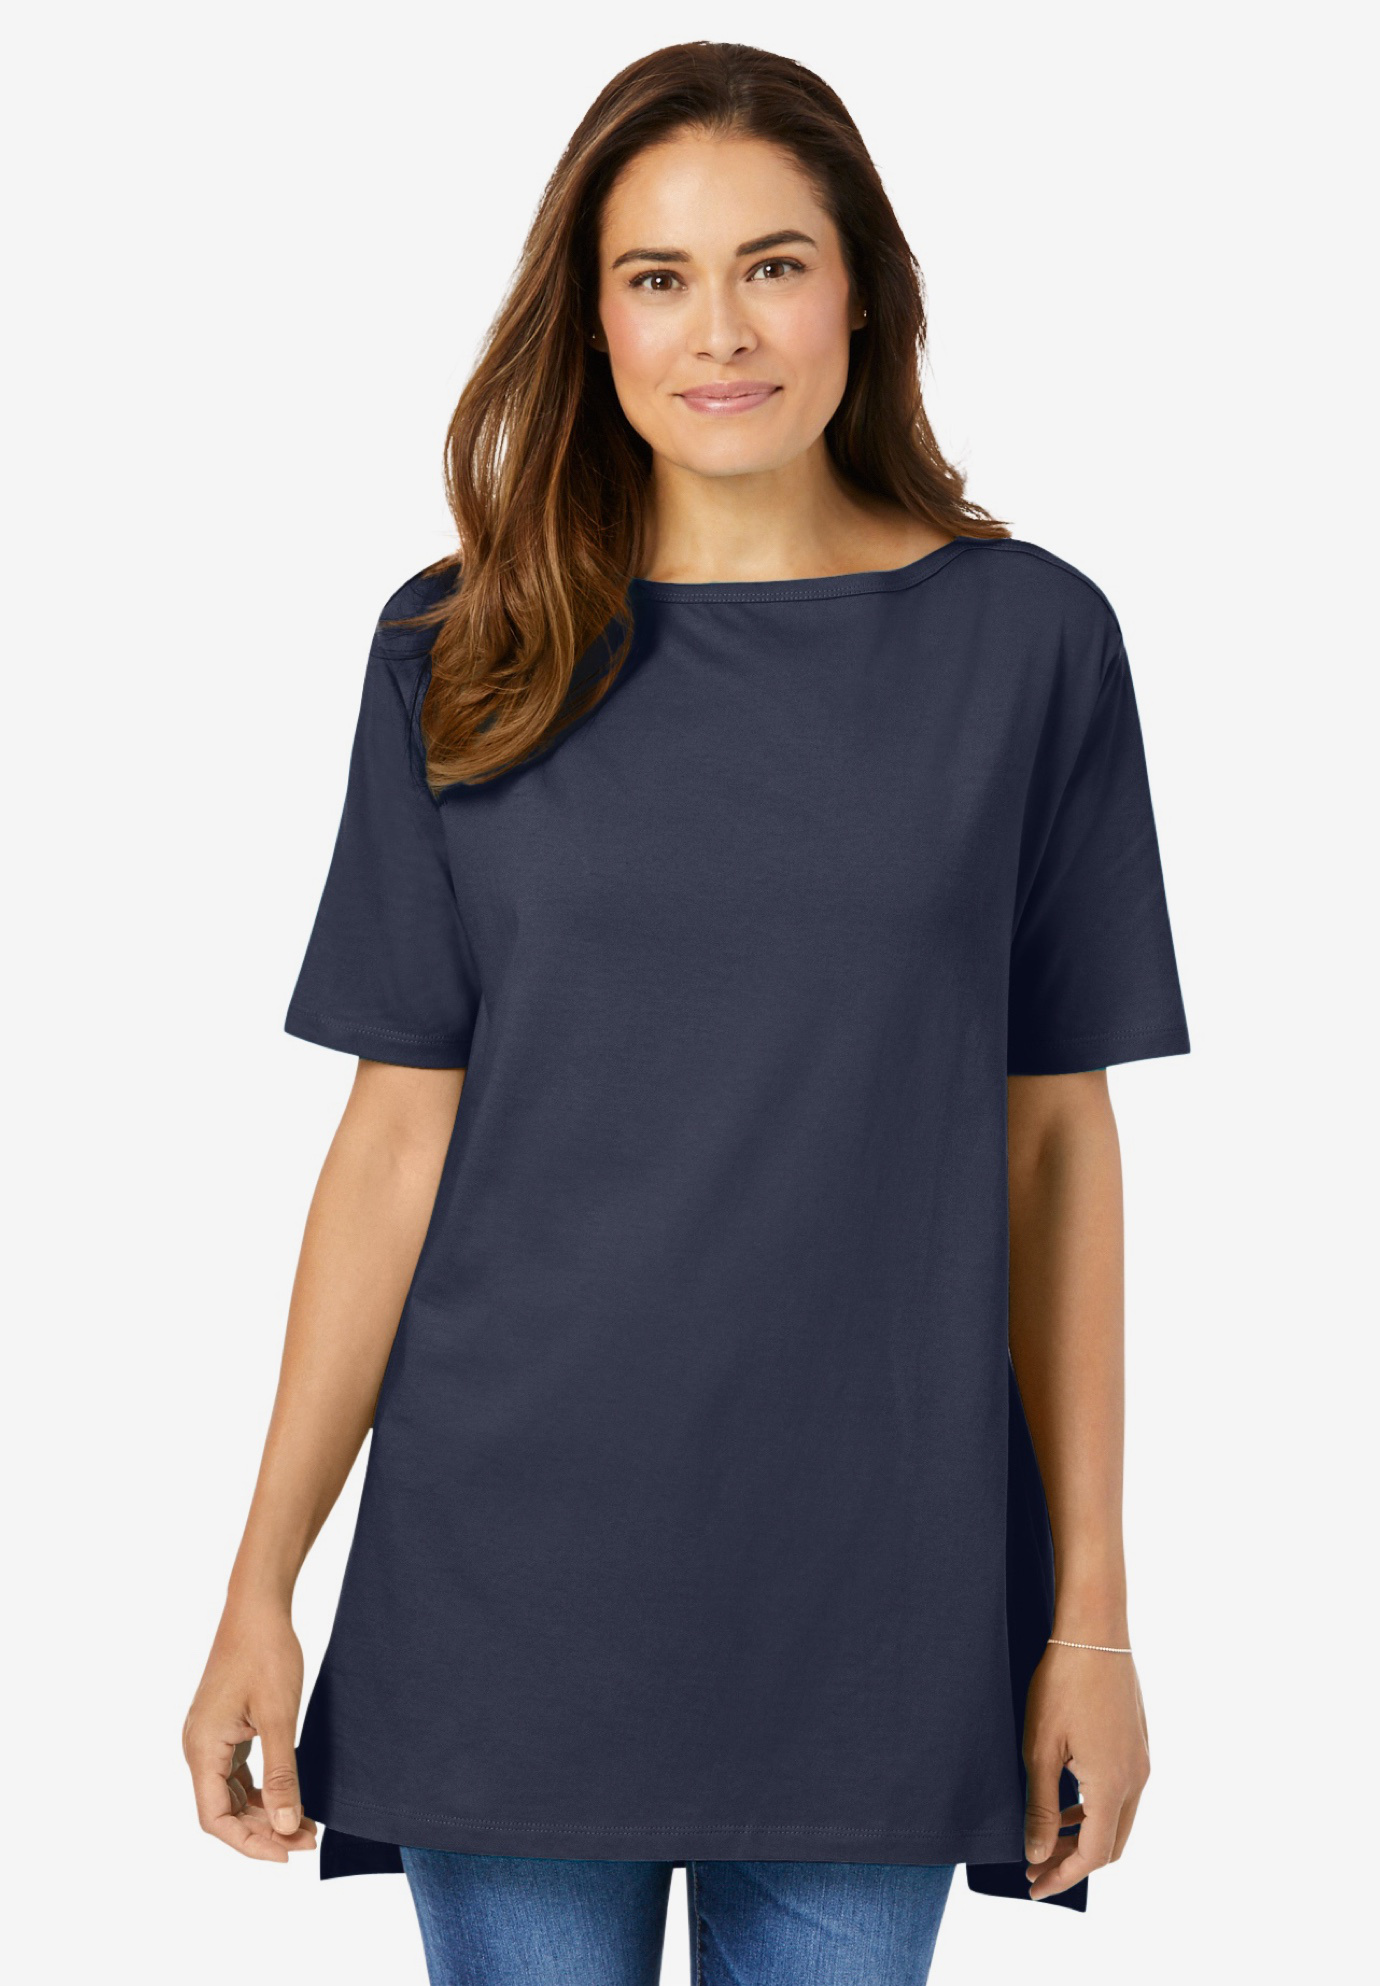 Perfect Boat Neck Elbow-Lengh Sleeve Tunic| Plus Size Tunics | Woman Within